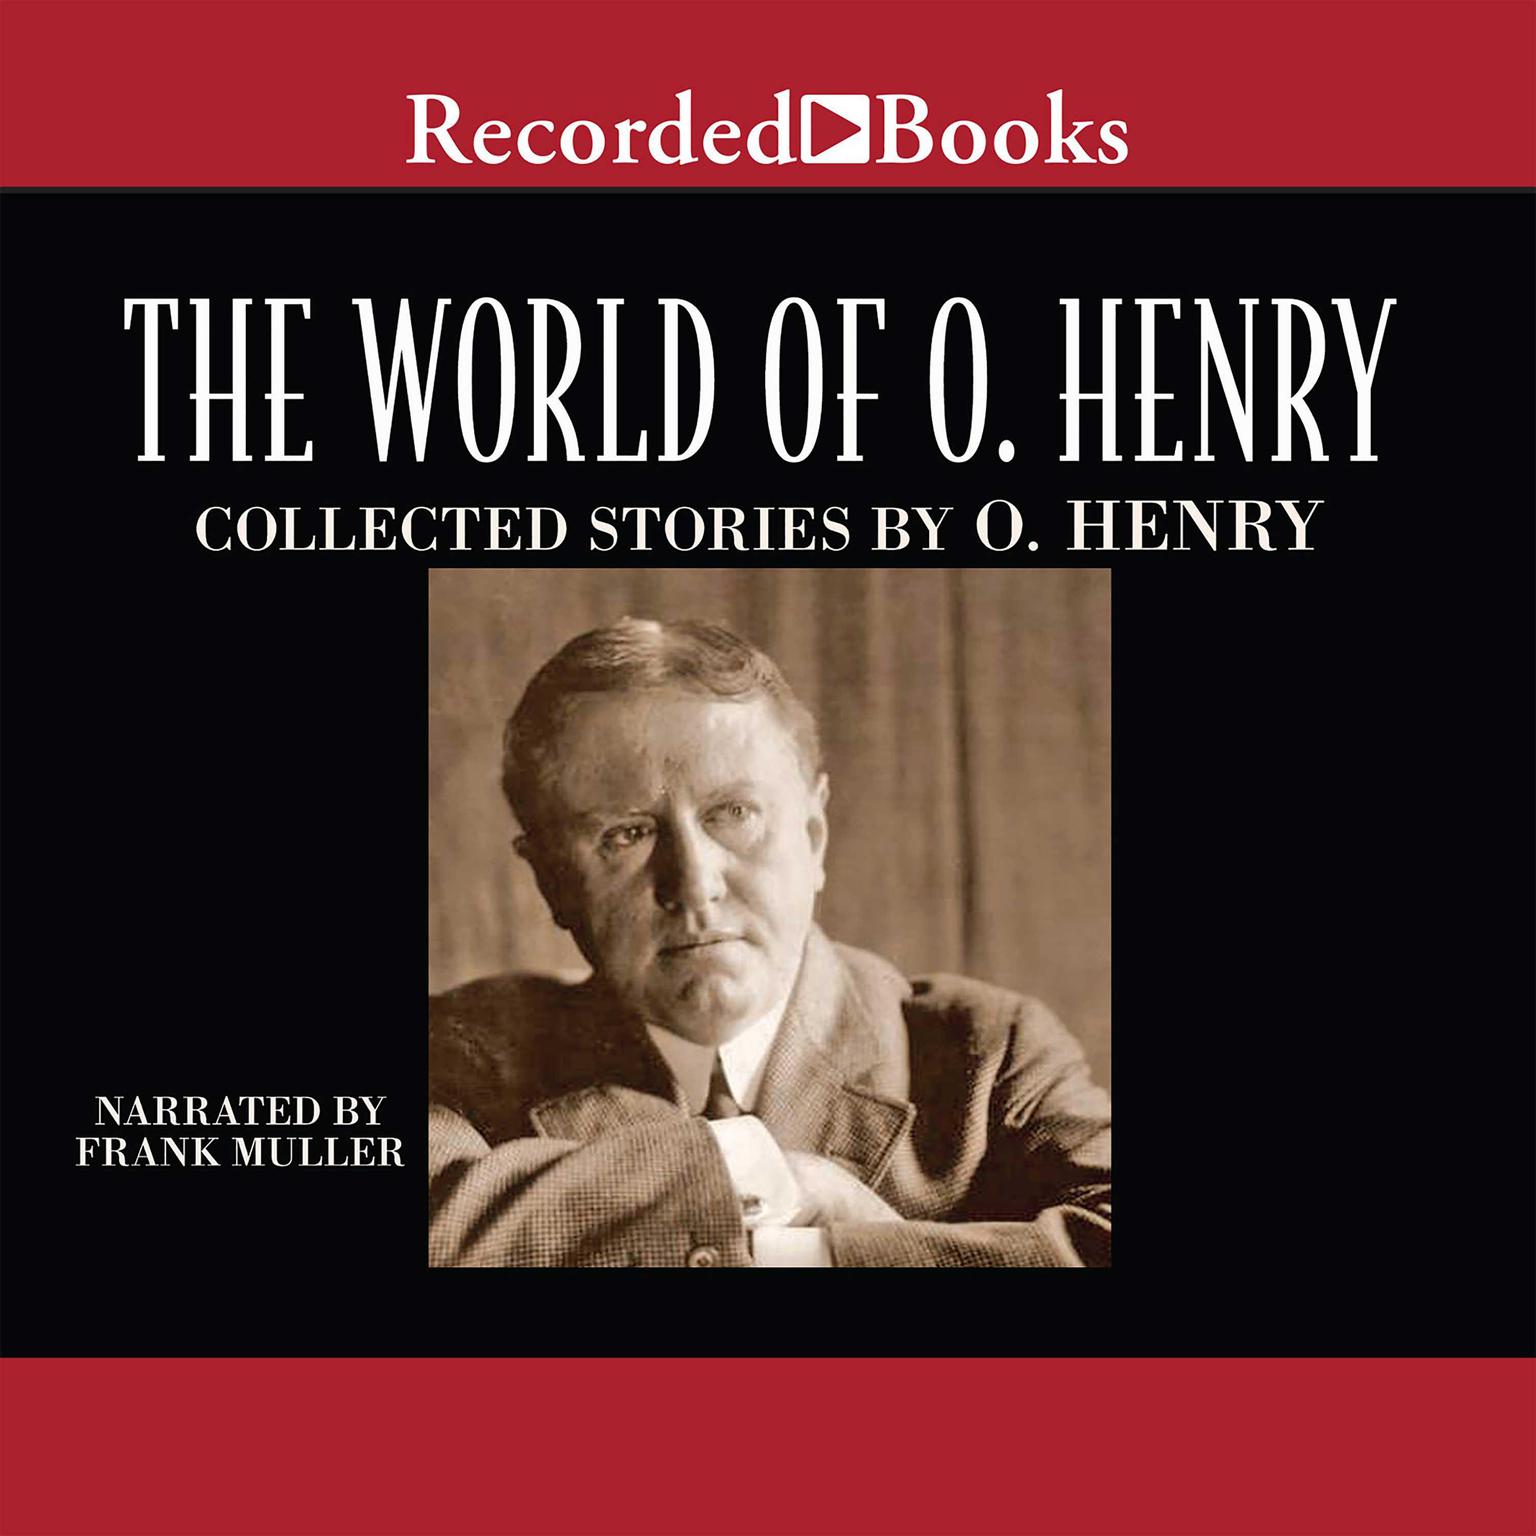 The World of O.Henry Audiobook, by O. Henry